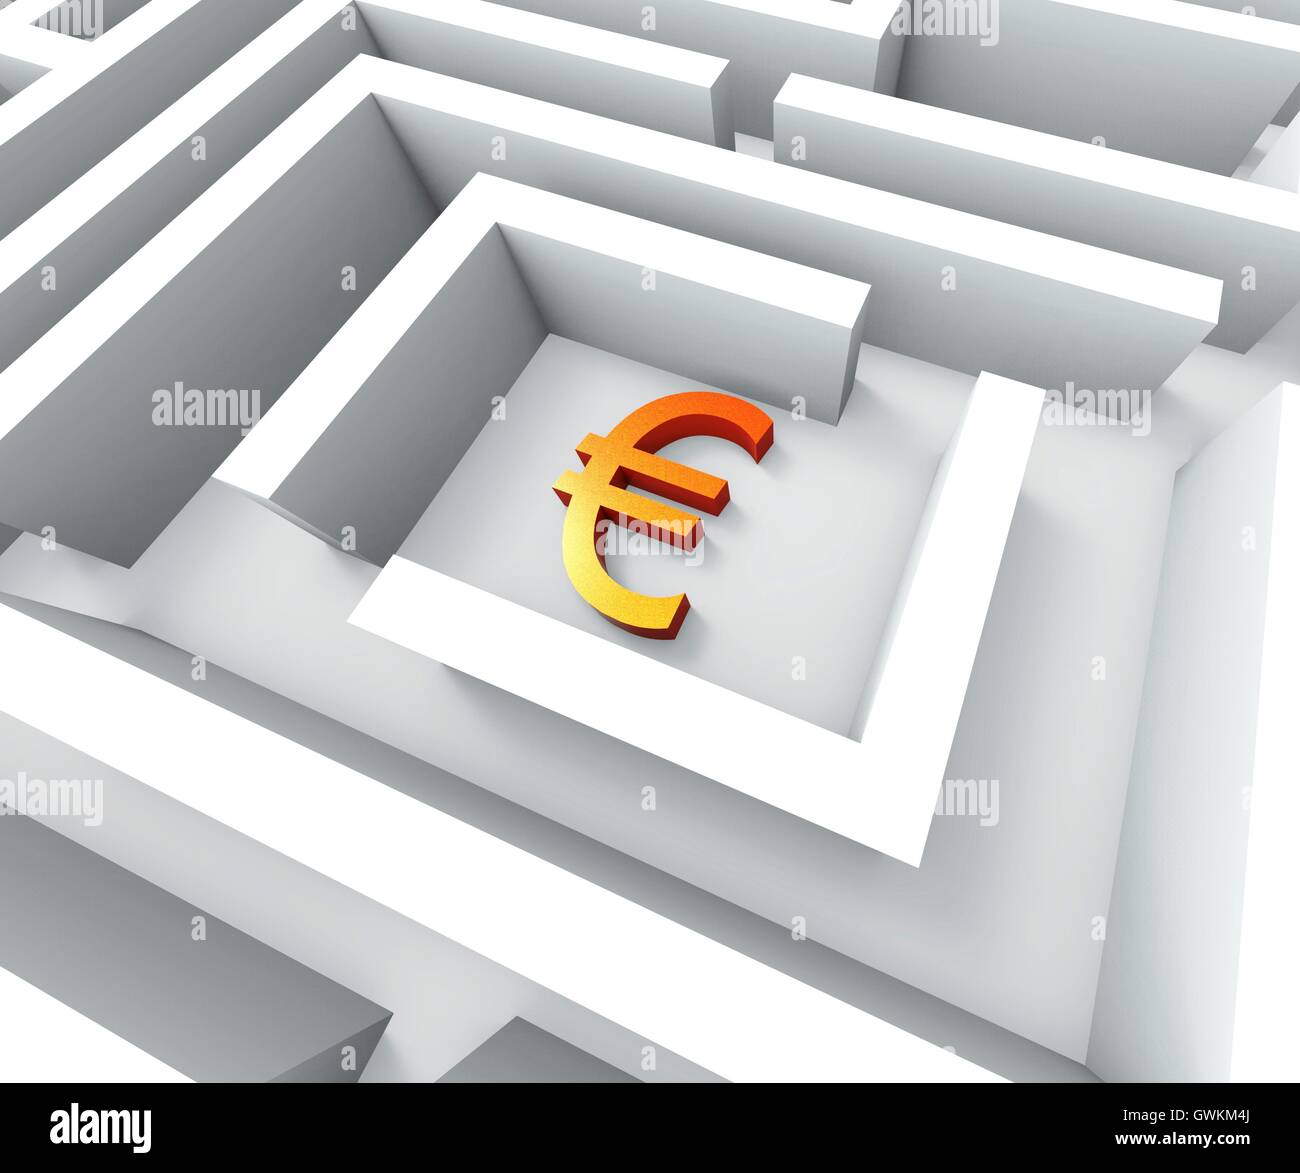 Euro Currency In Maze Shows Euros Credit Stock Photo